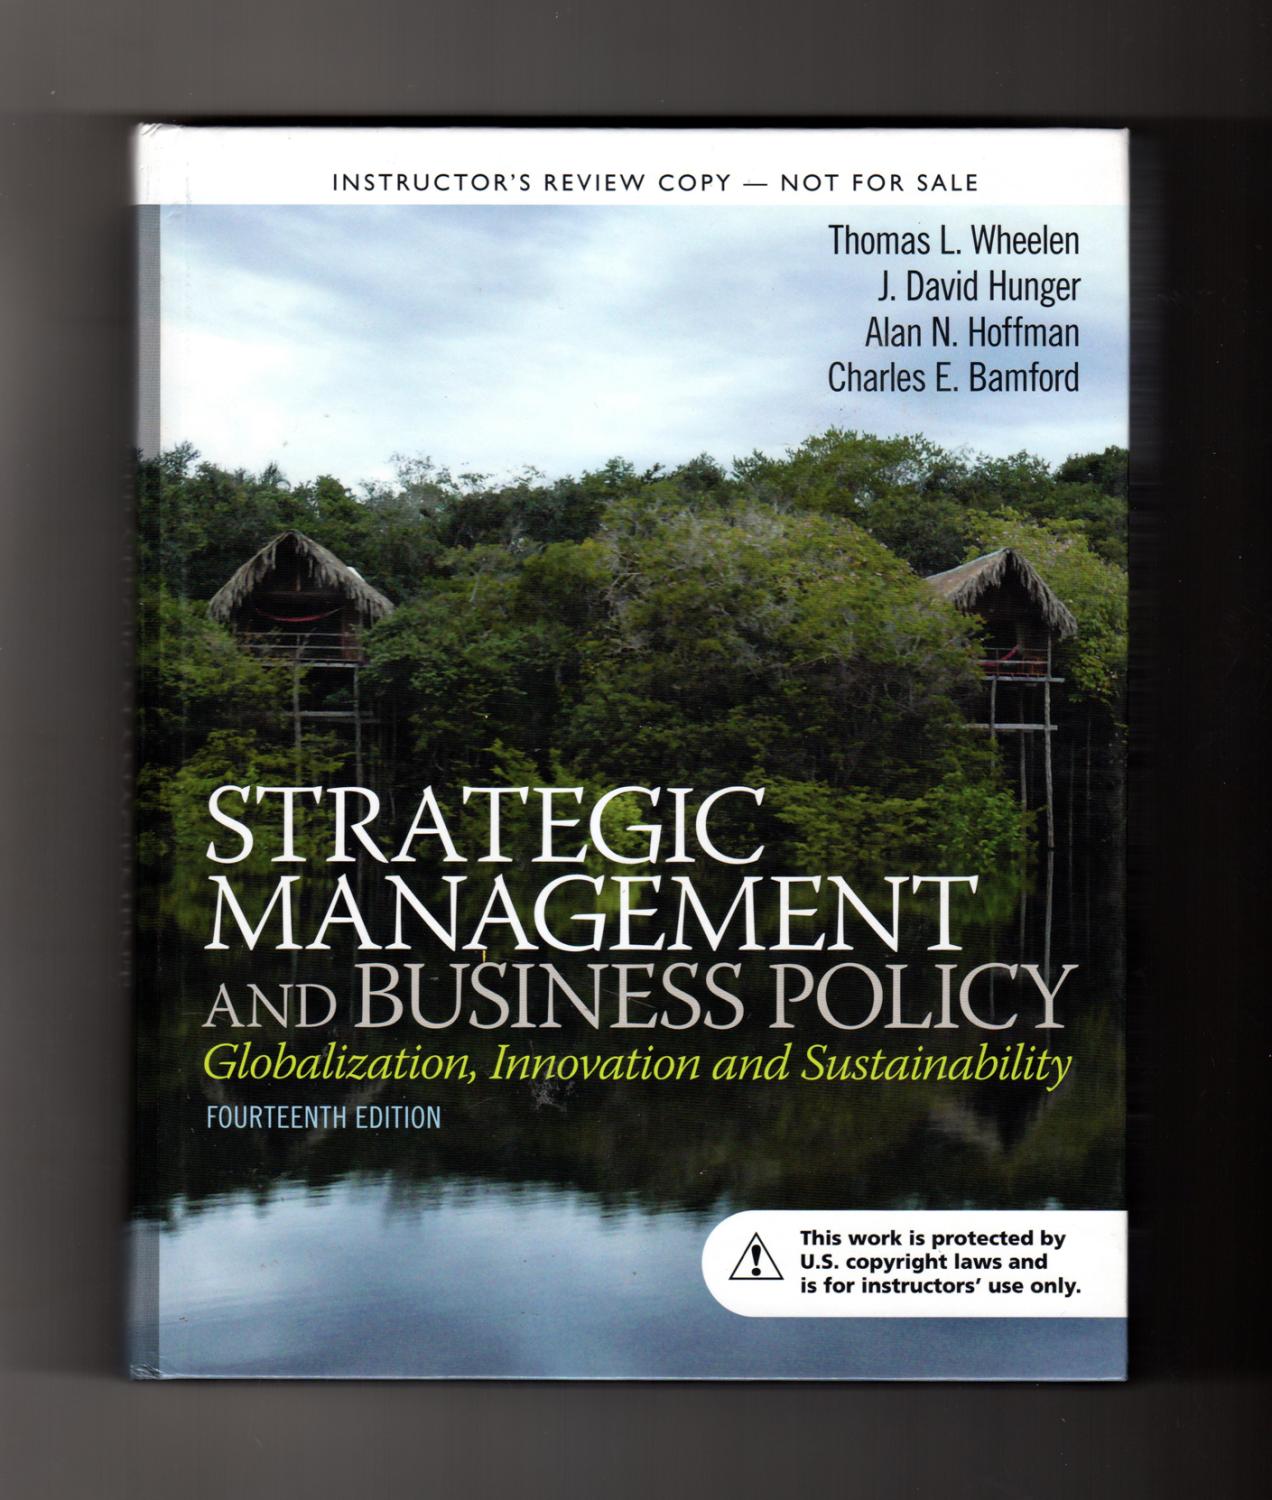 Strategic Management and Business Policy: Globalization